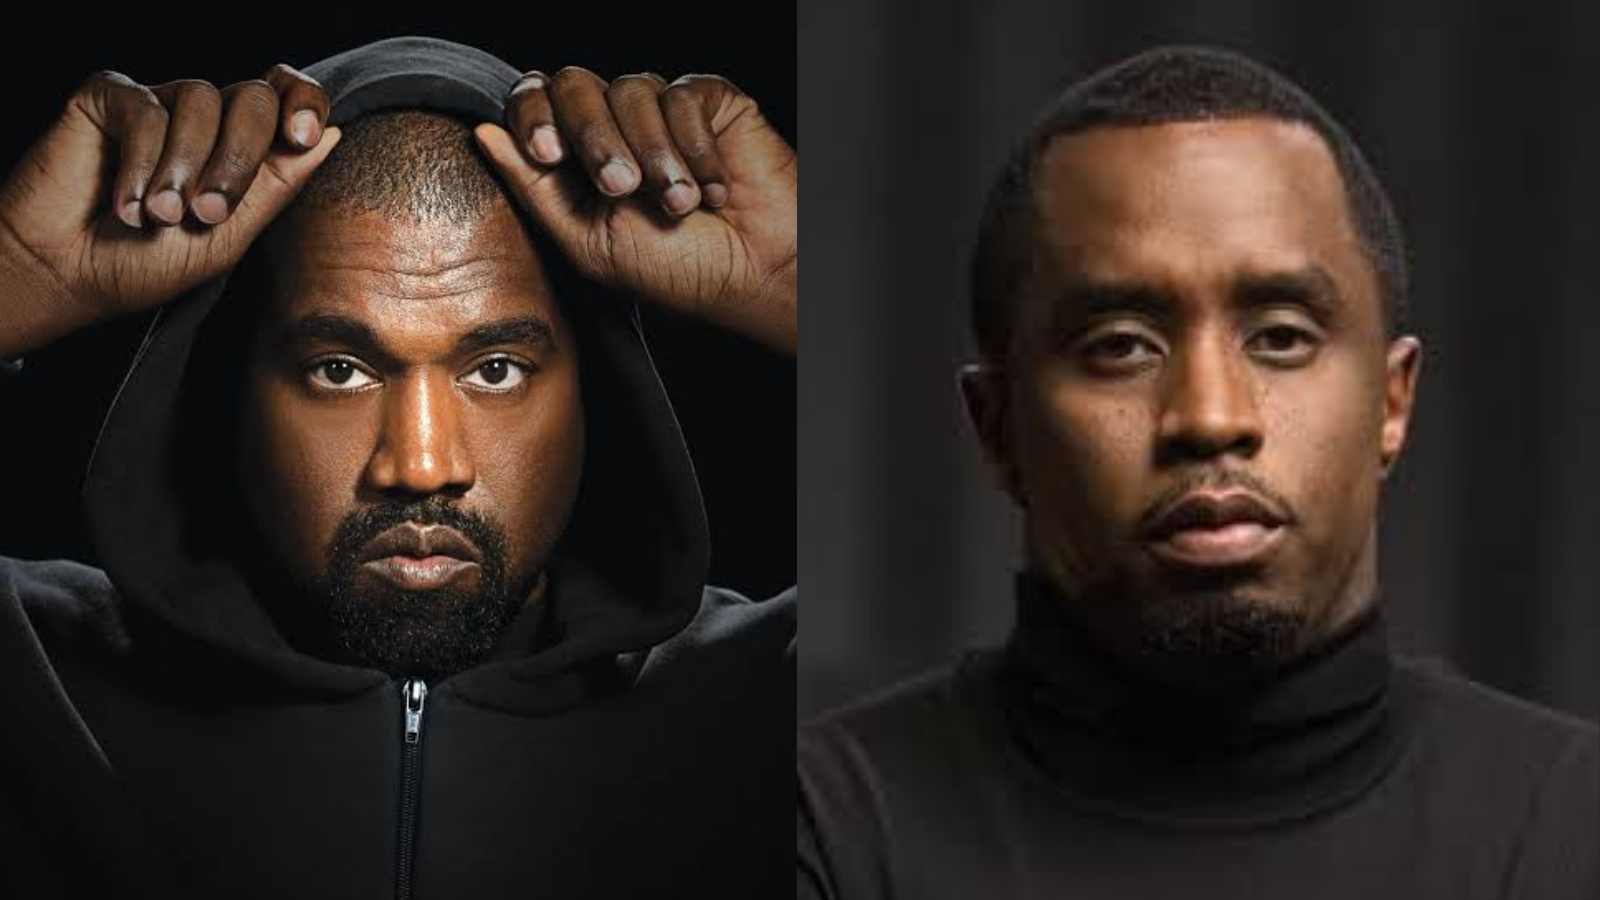 Diddy replaces Kanye West as the second wealthiest Hip Hop artist